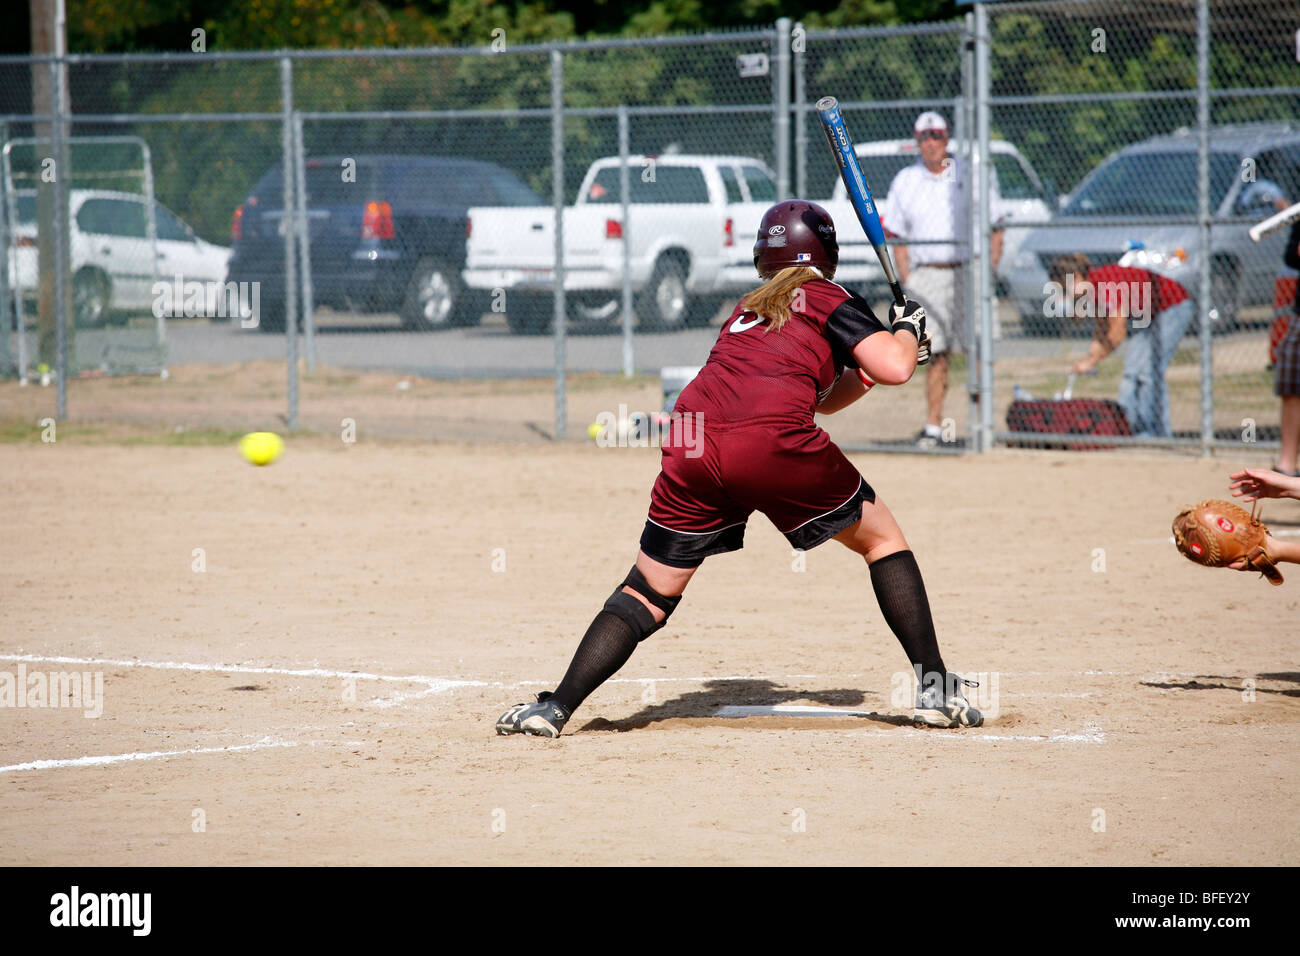 North Idaho College softball game, Sept. 28, 2008, Coeur D Alene, Idaho. Batter just about to swing at the pitch. Stock Photo